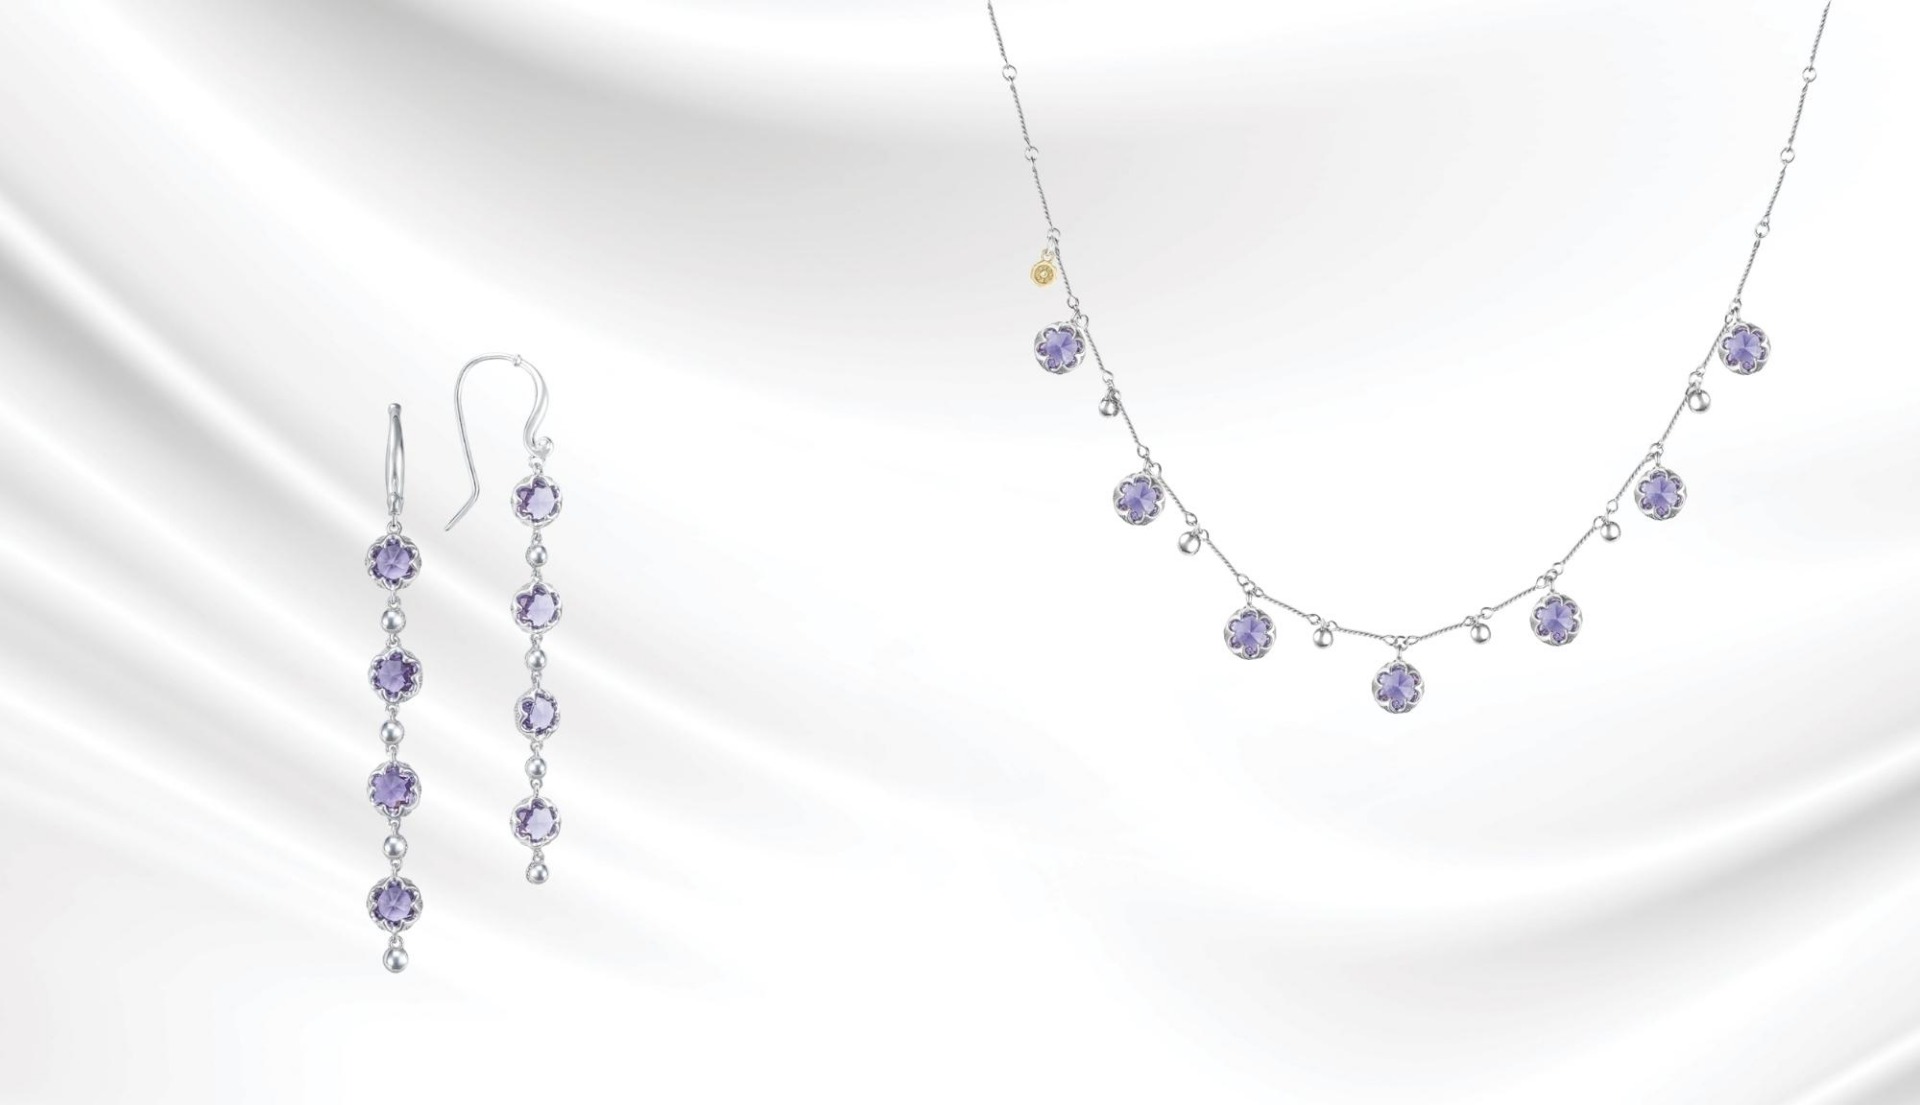 Tacori Earrings and necklace